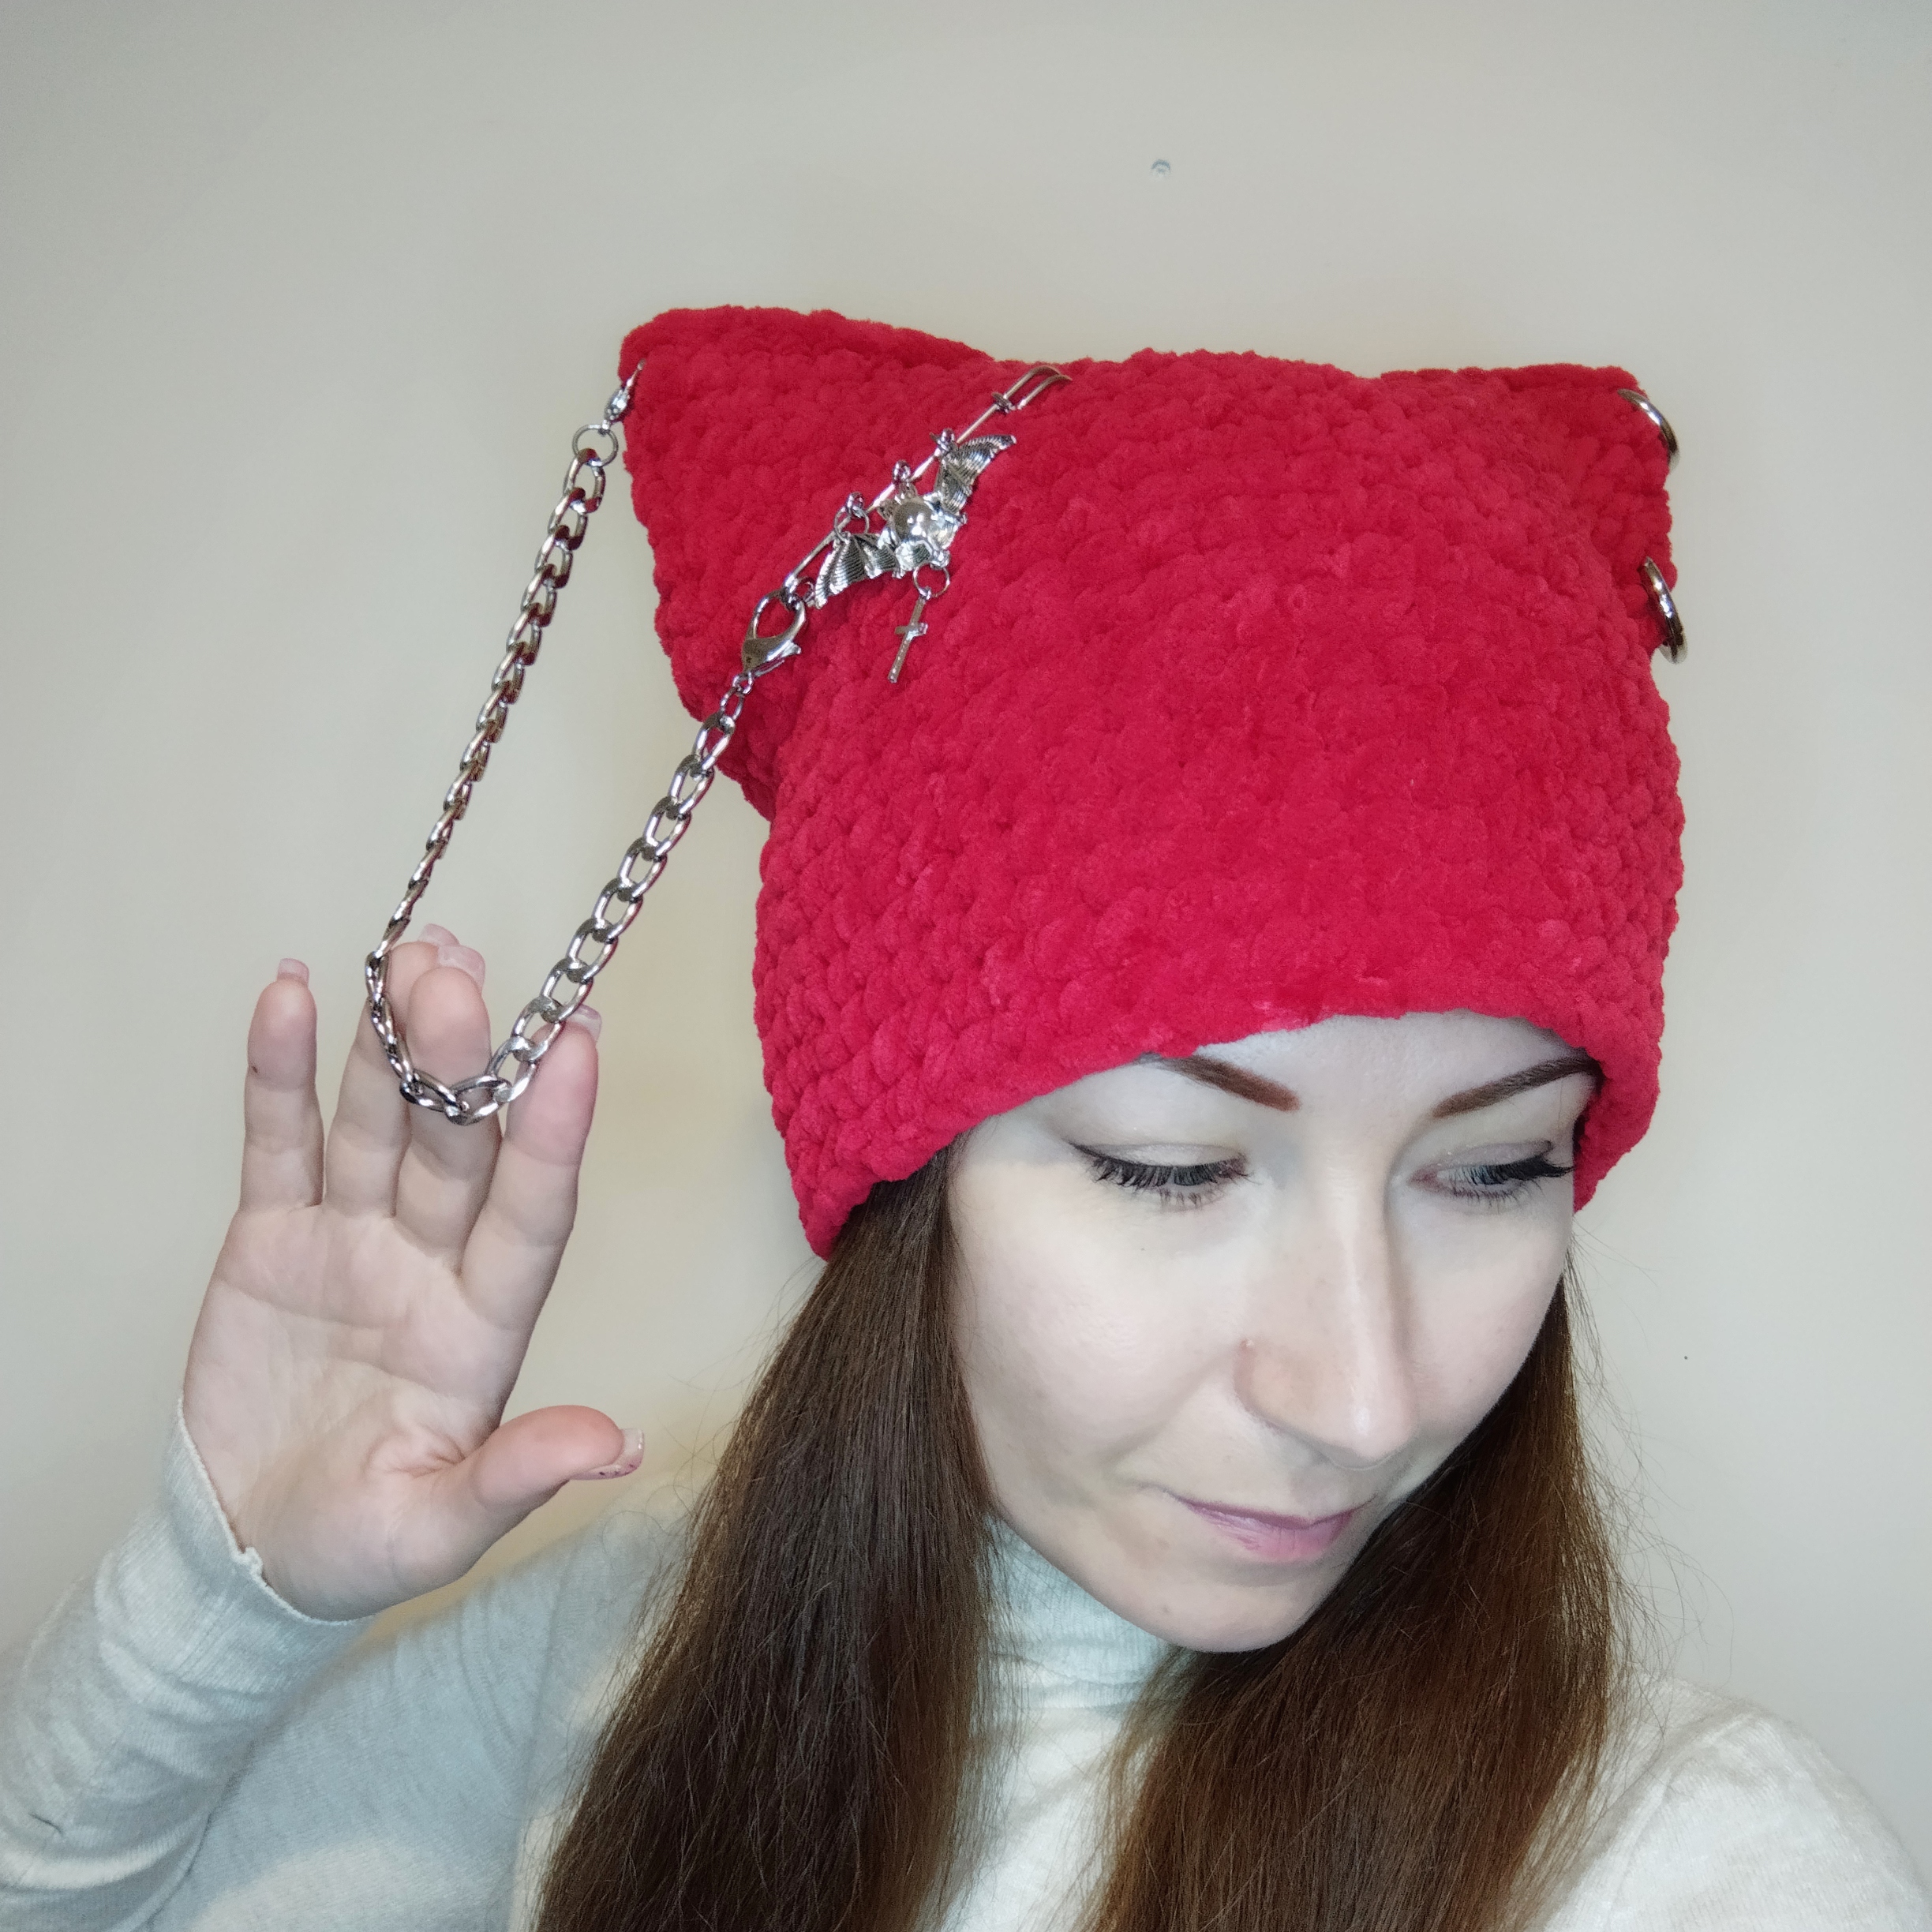 Cat ears beanie hat. Beqnie with cat ears